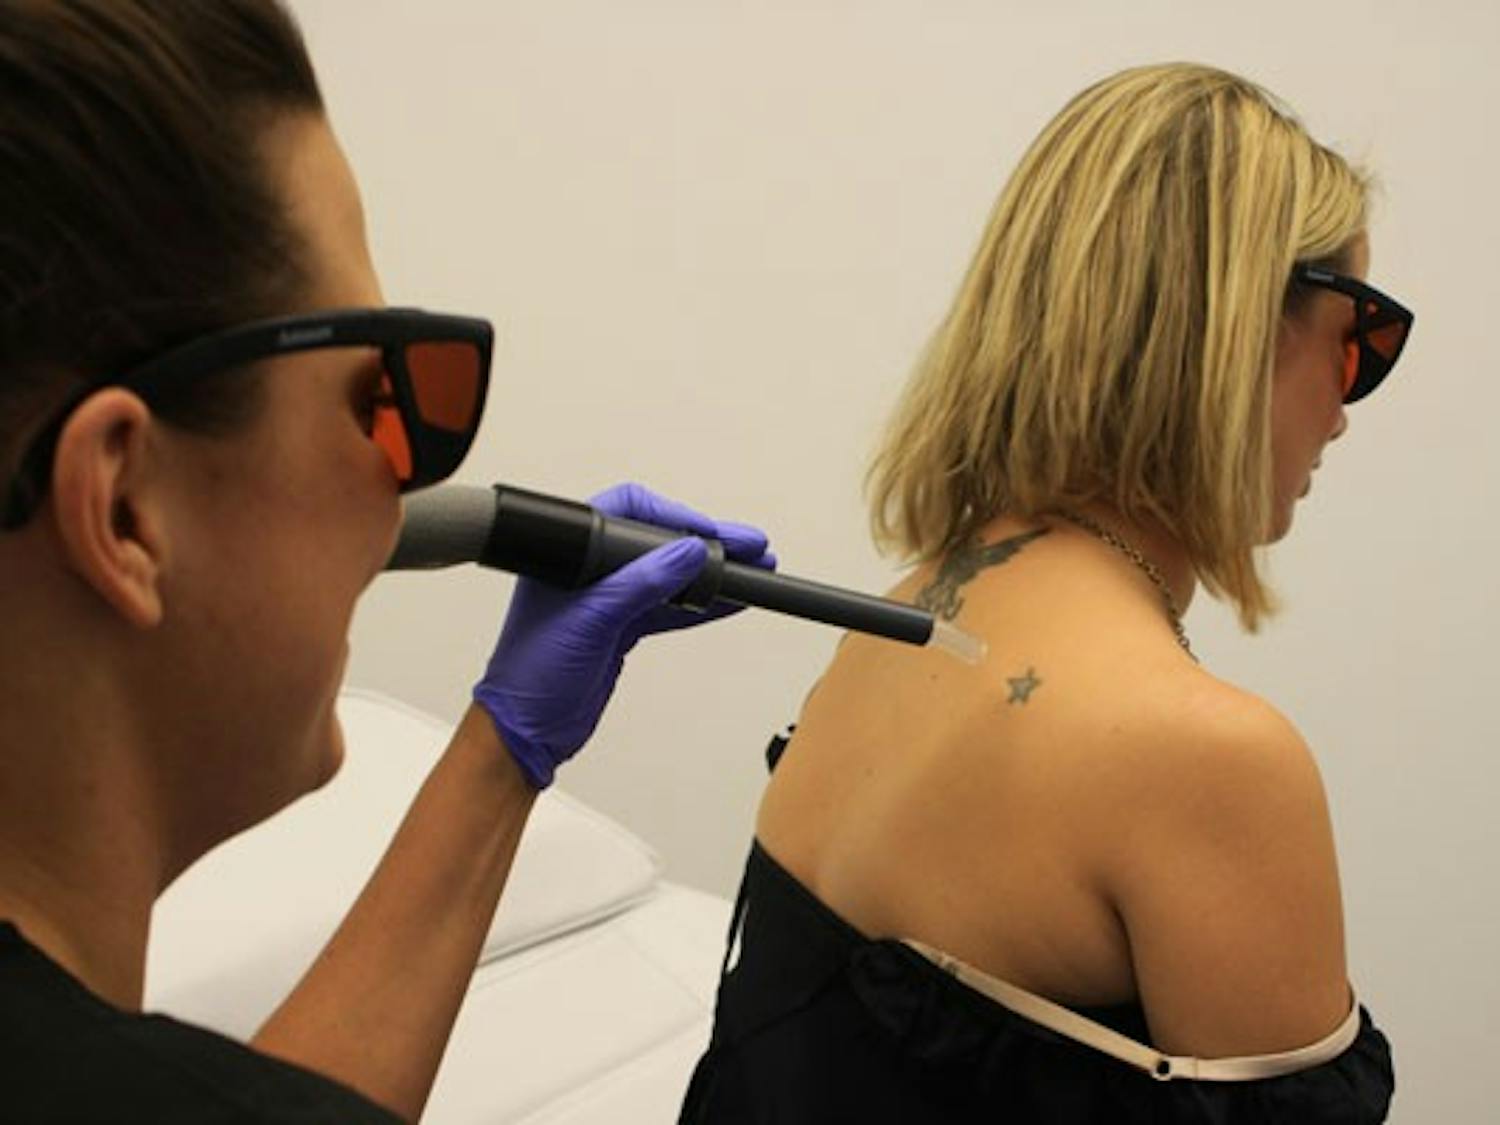 Holly Rennett, a registered nurse, begins treatment to remove a star tattoo on Tricia Corley's shoulder at Mill Avenue's Dr. TATTOFF on Nov. 15. (Photo by Jessie Wardarski)